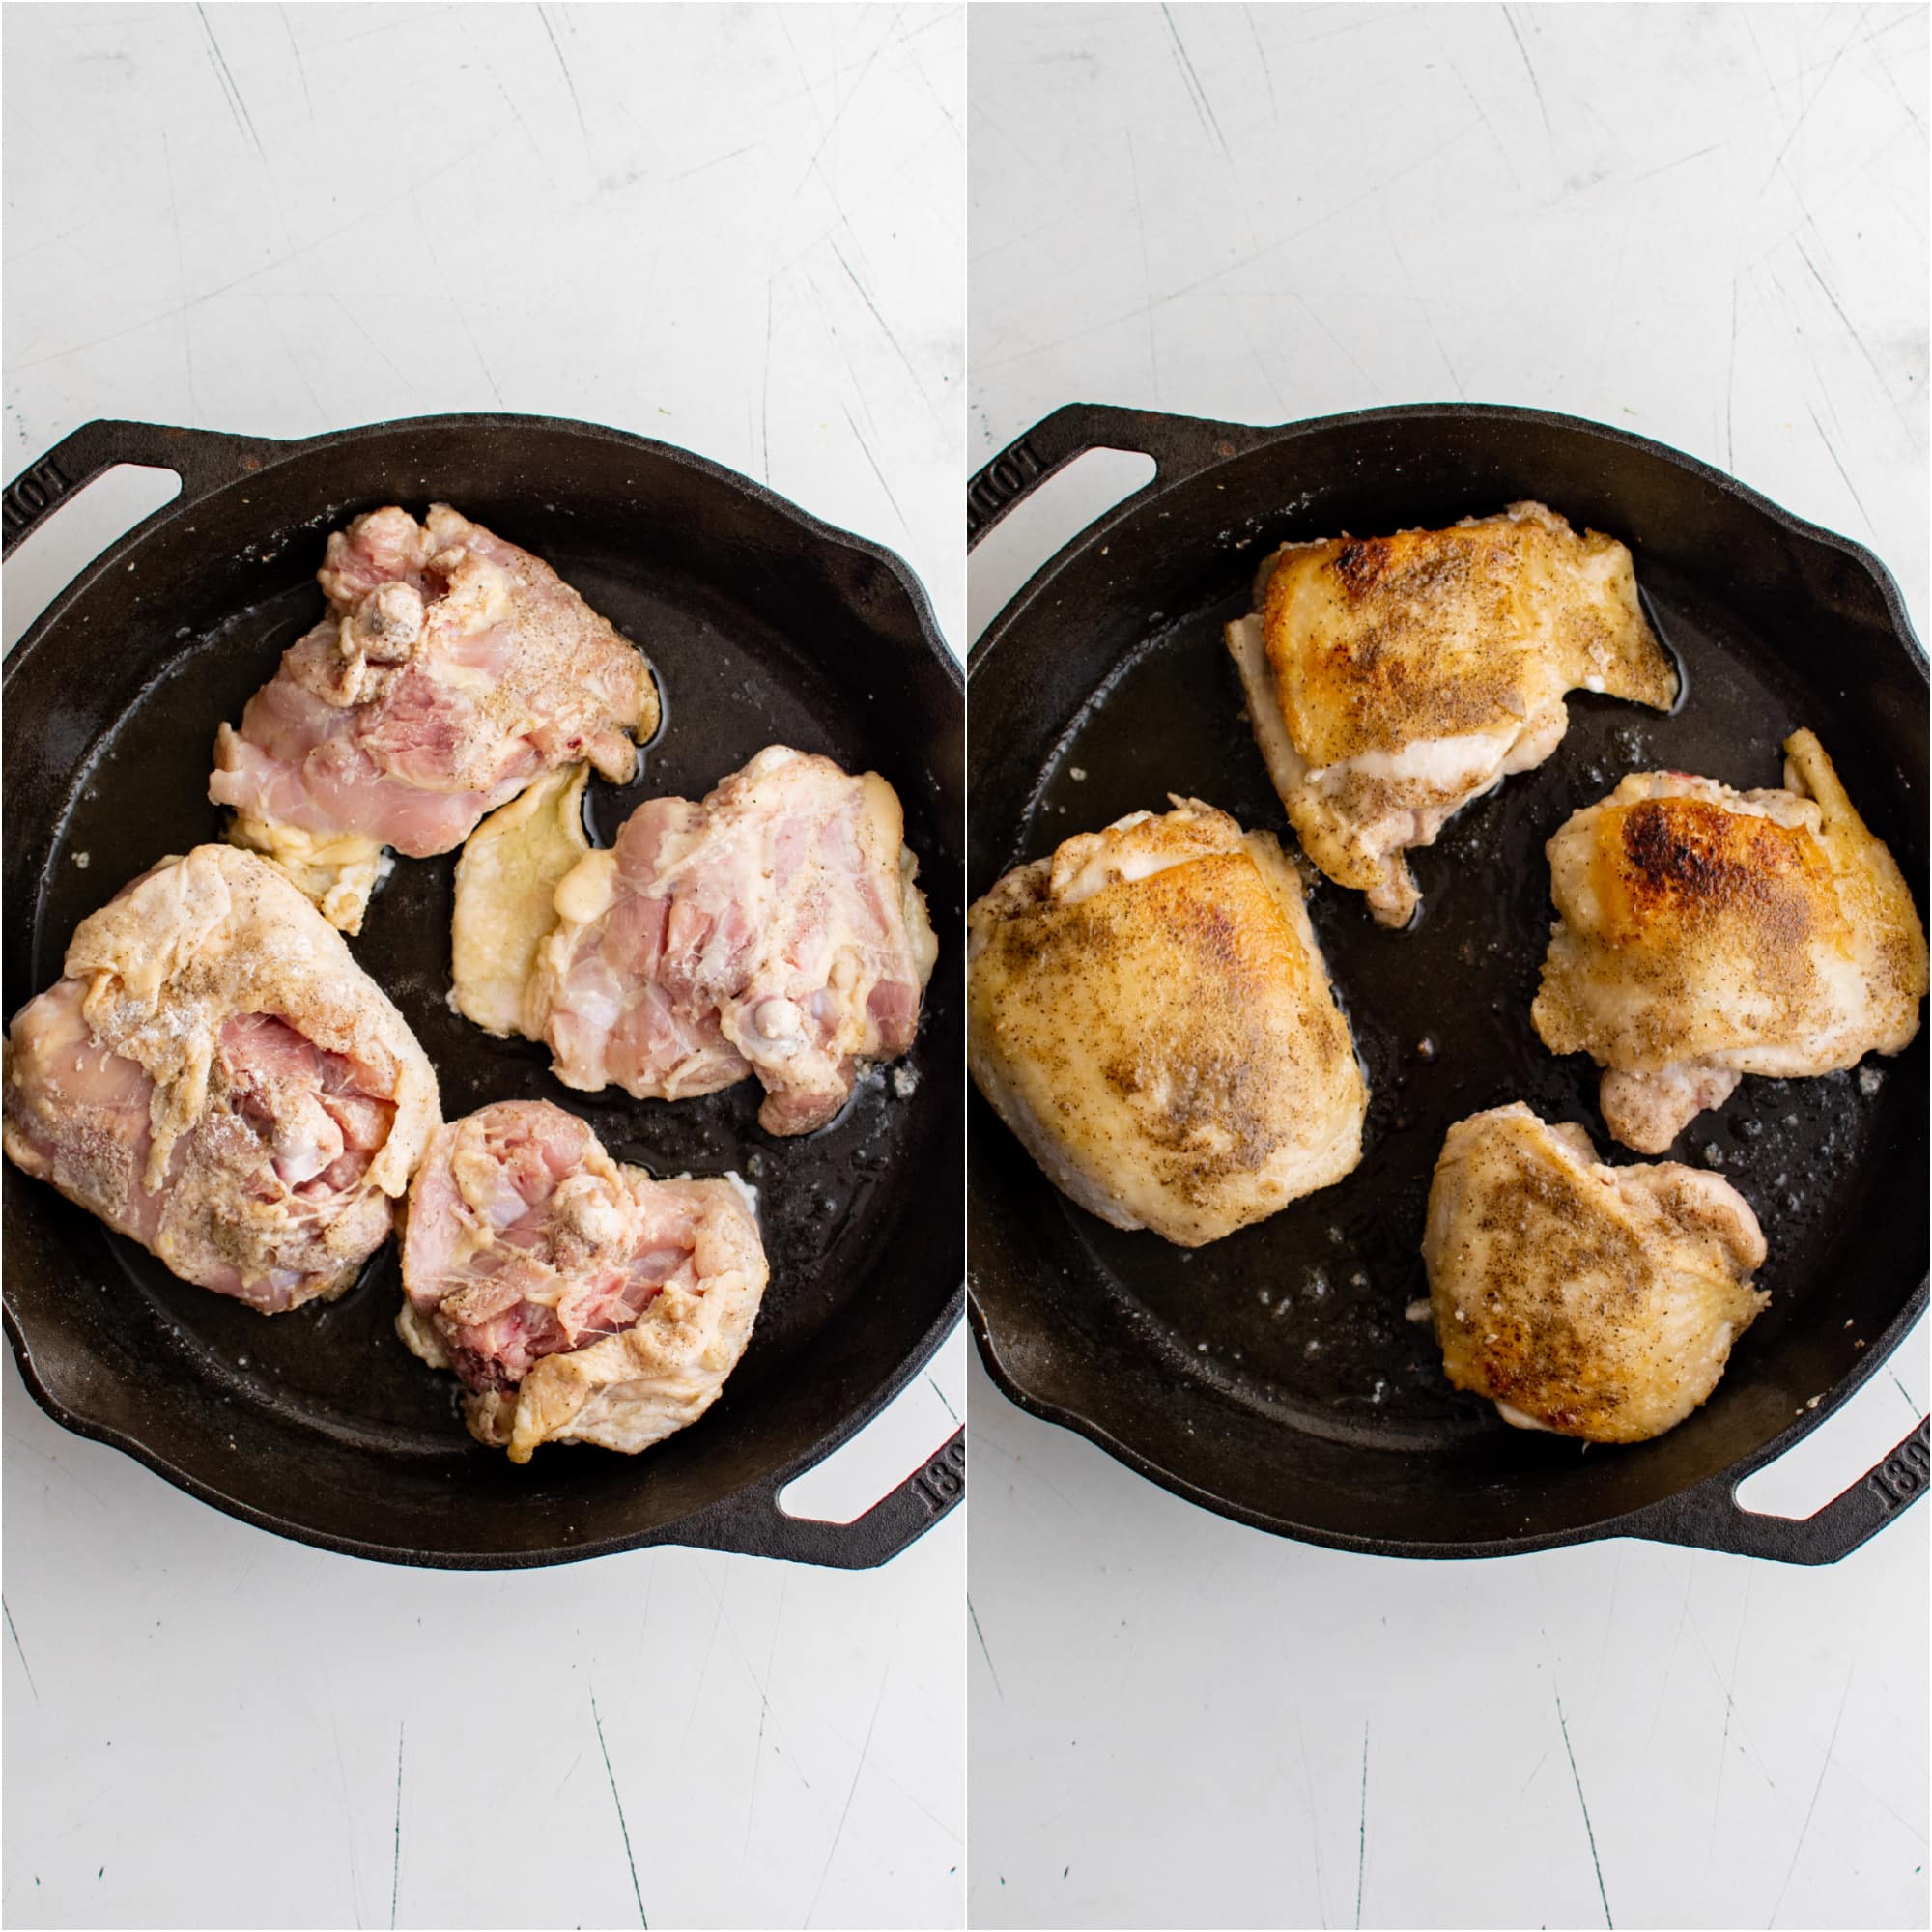 Two images: In the first image four raw chicken thighs are added skin-side-down to a large cast iron pan; in the second image four browned chicken thighs a resting in a large cast iron pan.